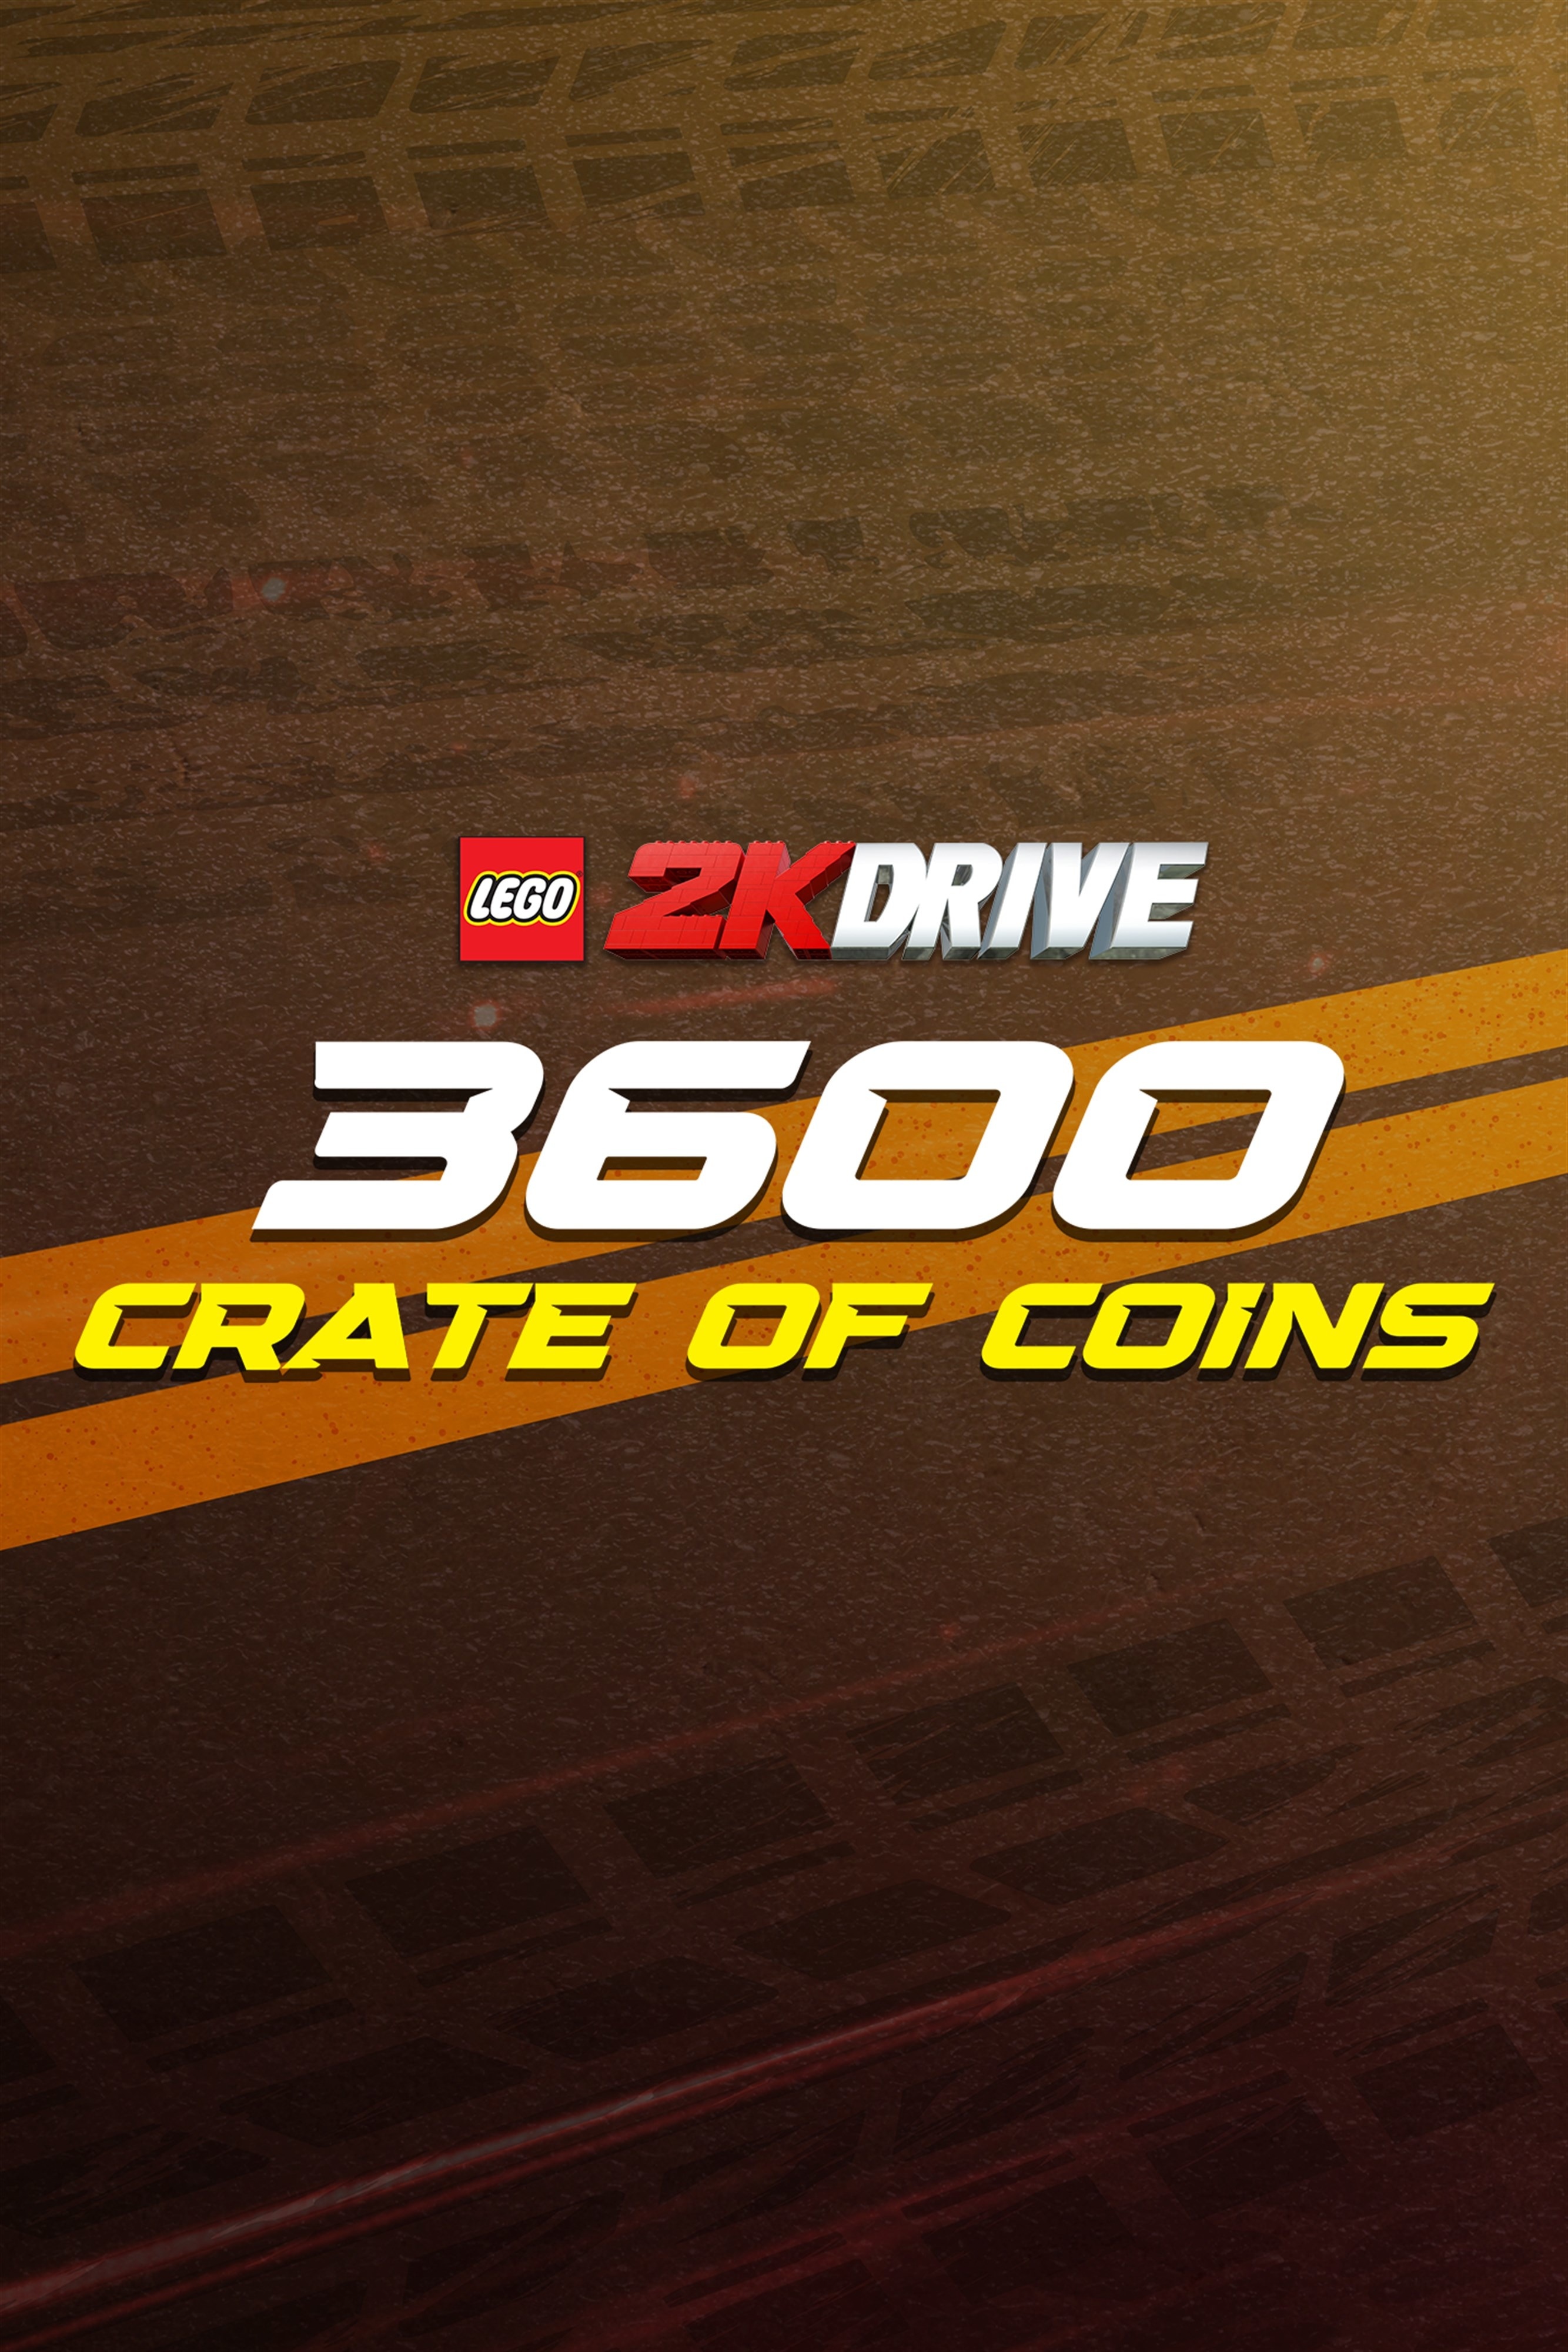 Xbox LEGO 2K Drive Crate of Coins Download Code (Xbox) zum Sofortdownload